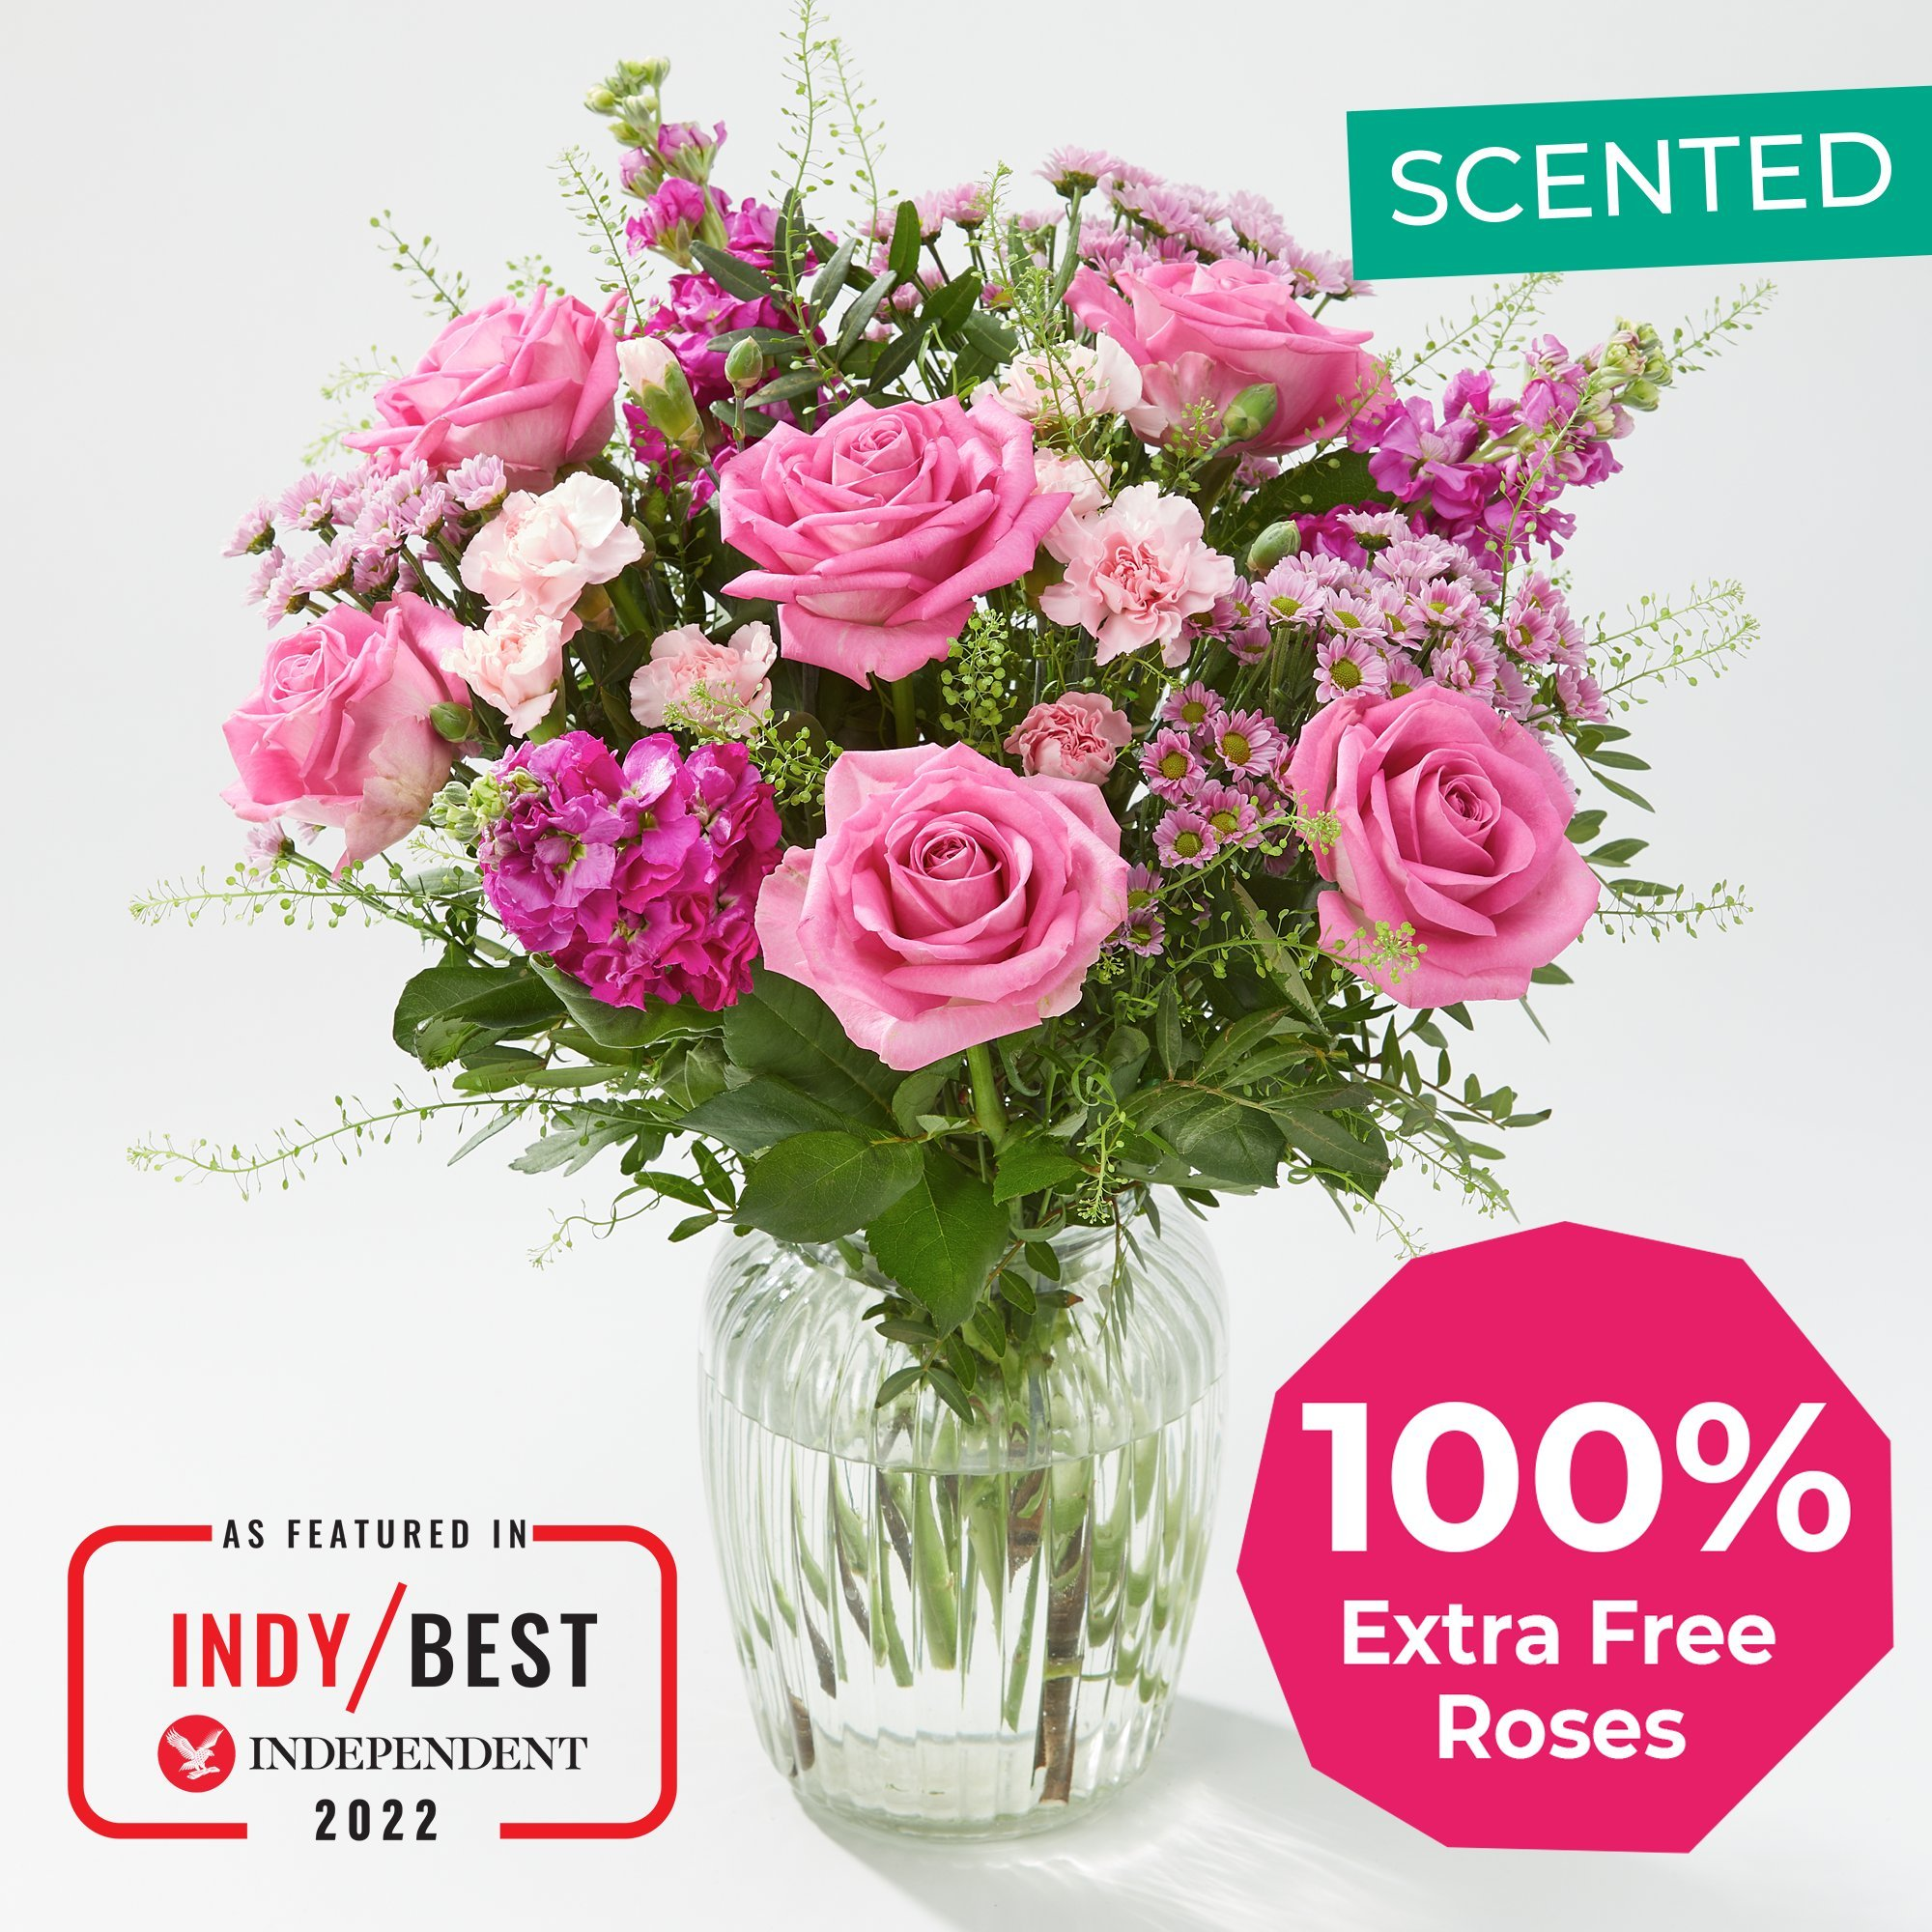 Pretty Pinks - 100% Extra Free Roses